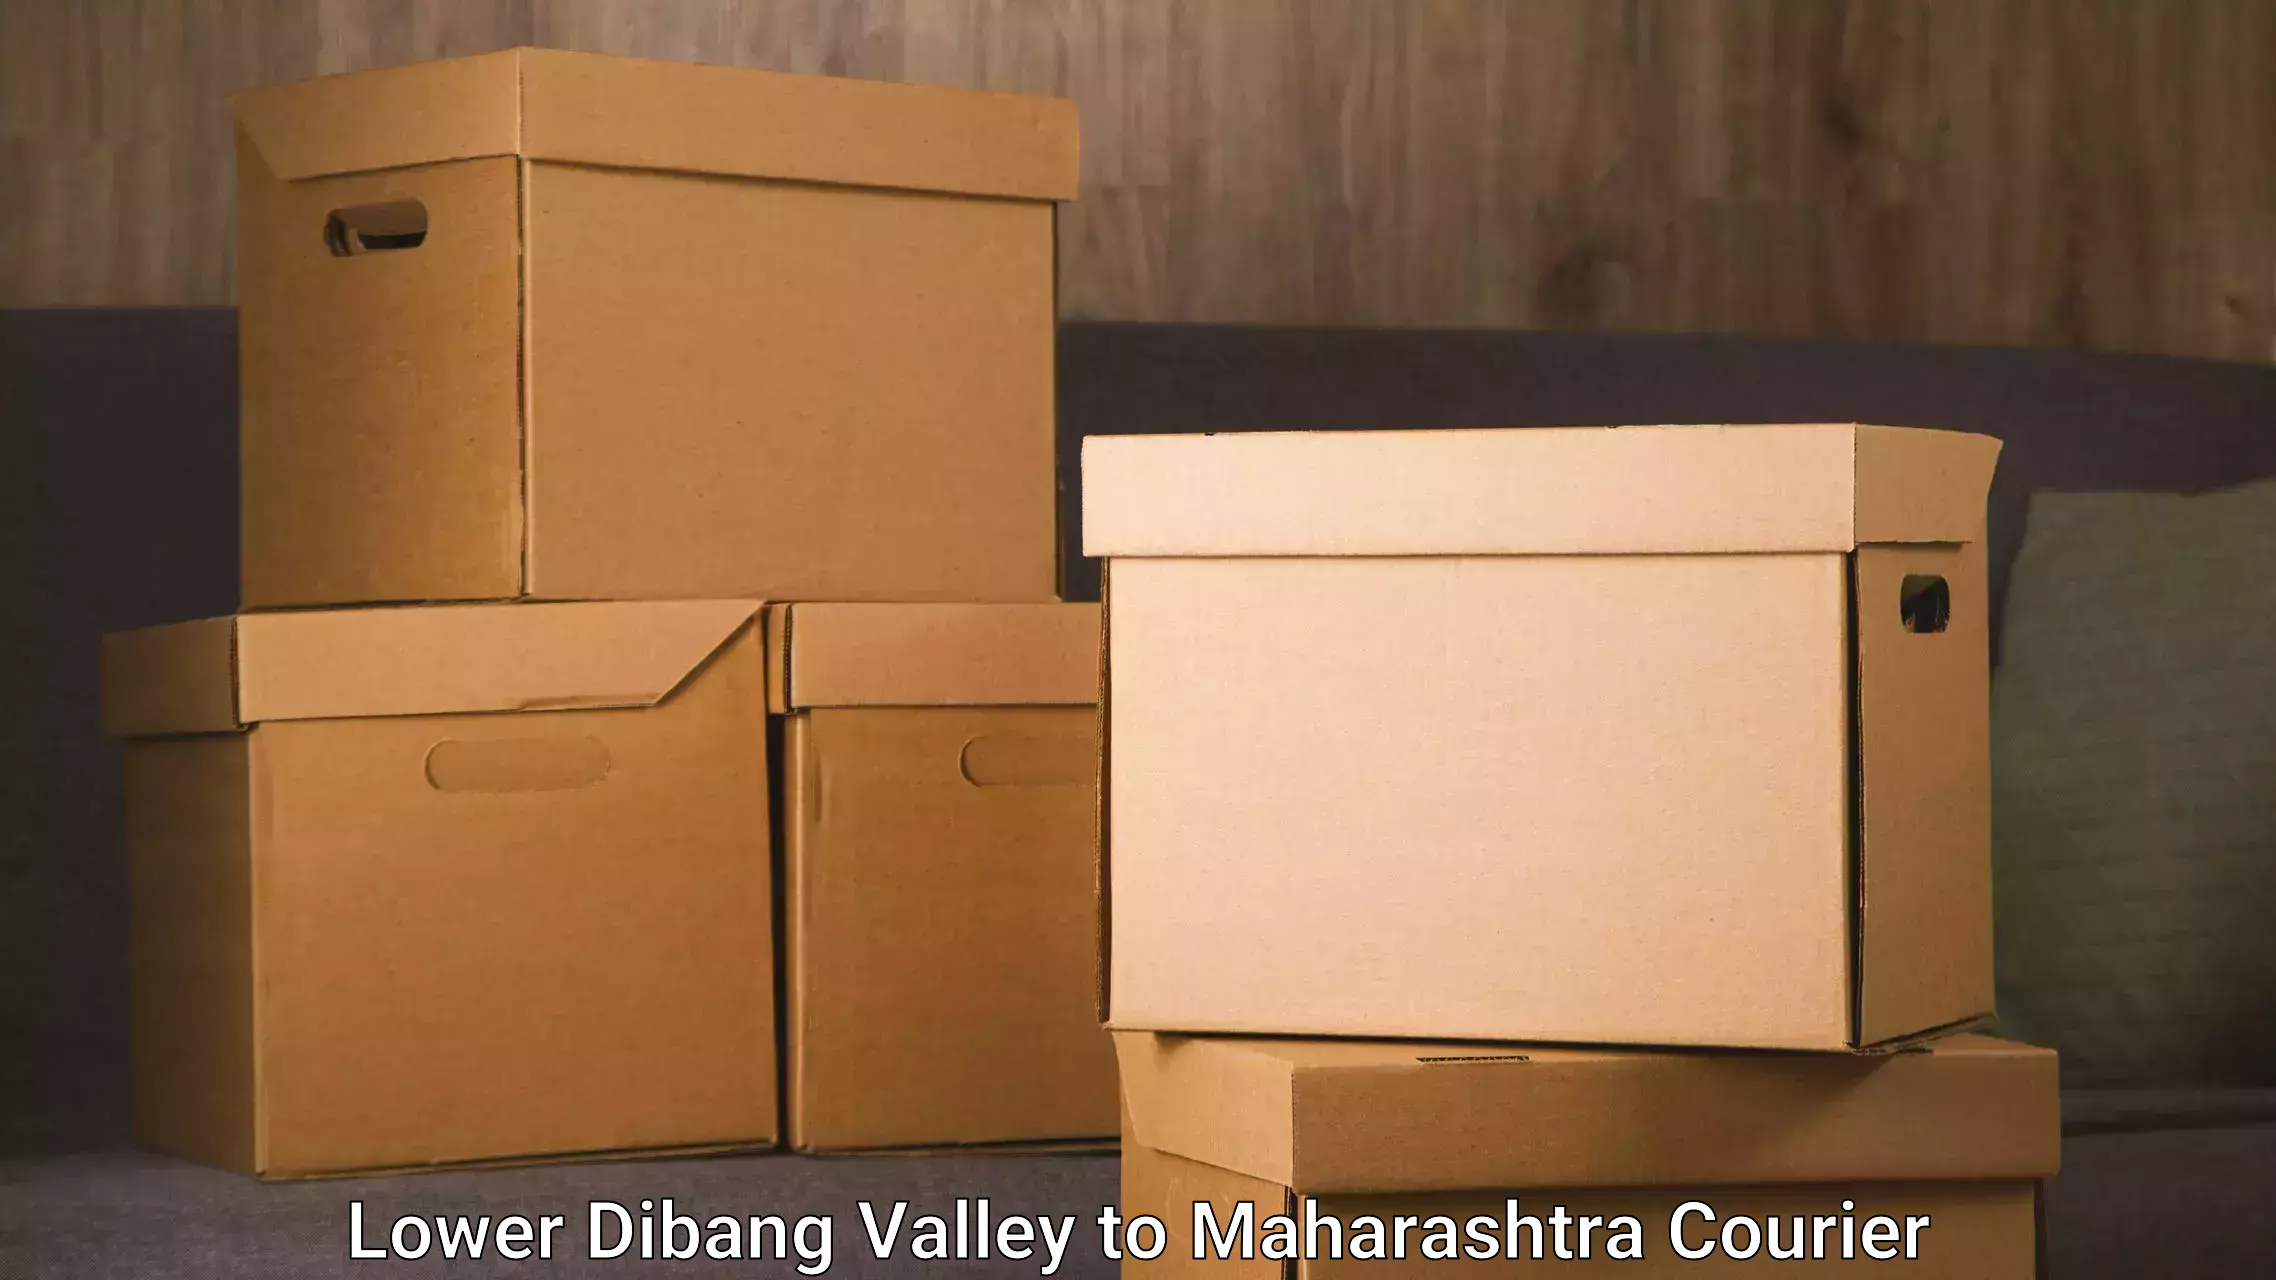 Courier service comparison in Lower Dibang Valley to Miraj